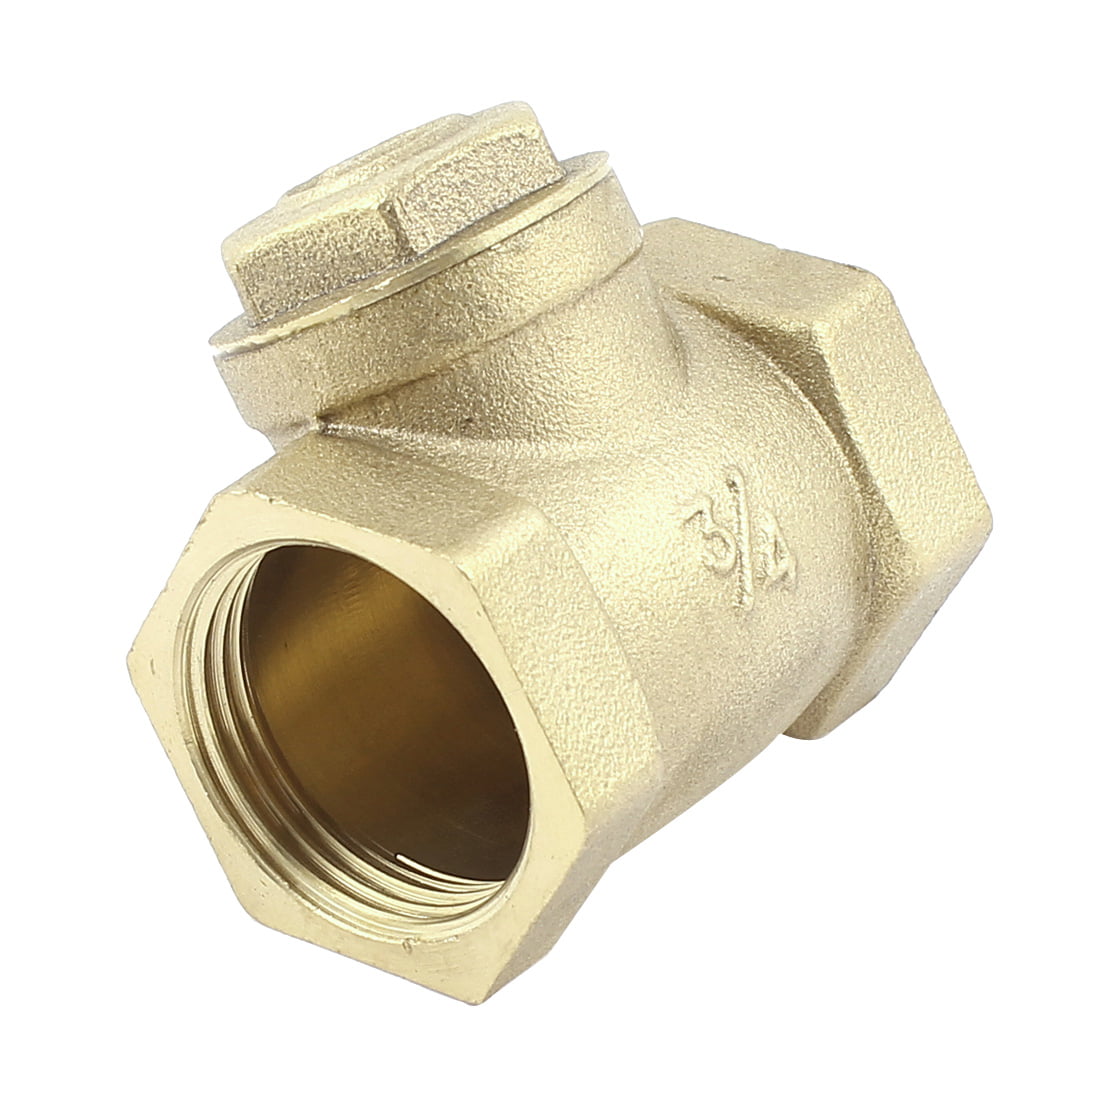 uxcell 1/4 BSP Female Threaded Fuel Line Water Non-Return One Way Check Valve 